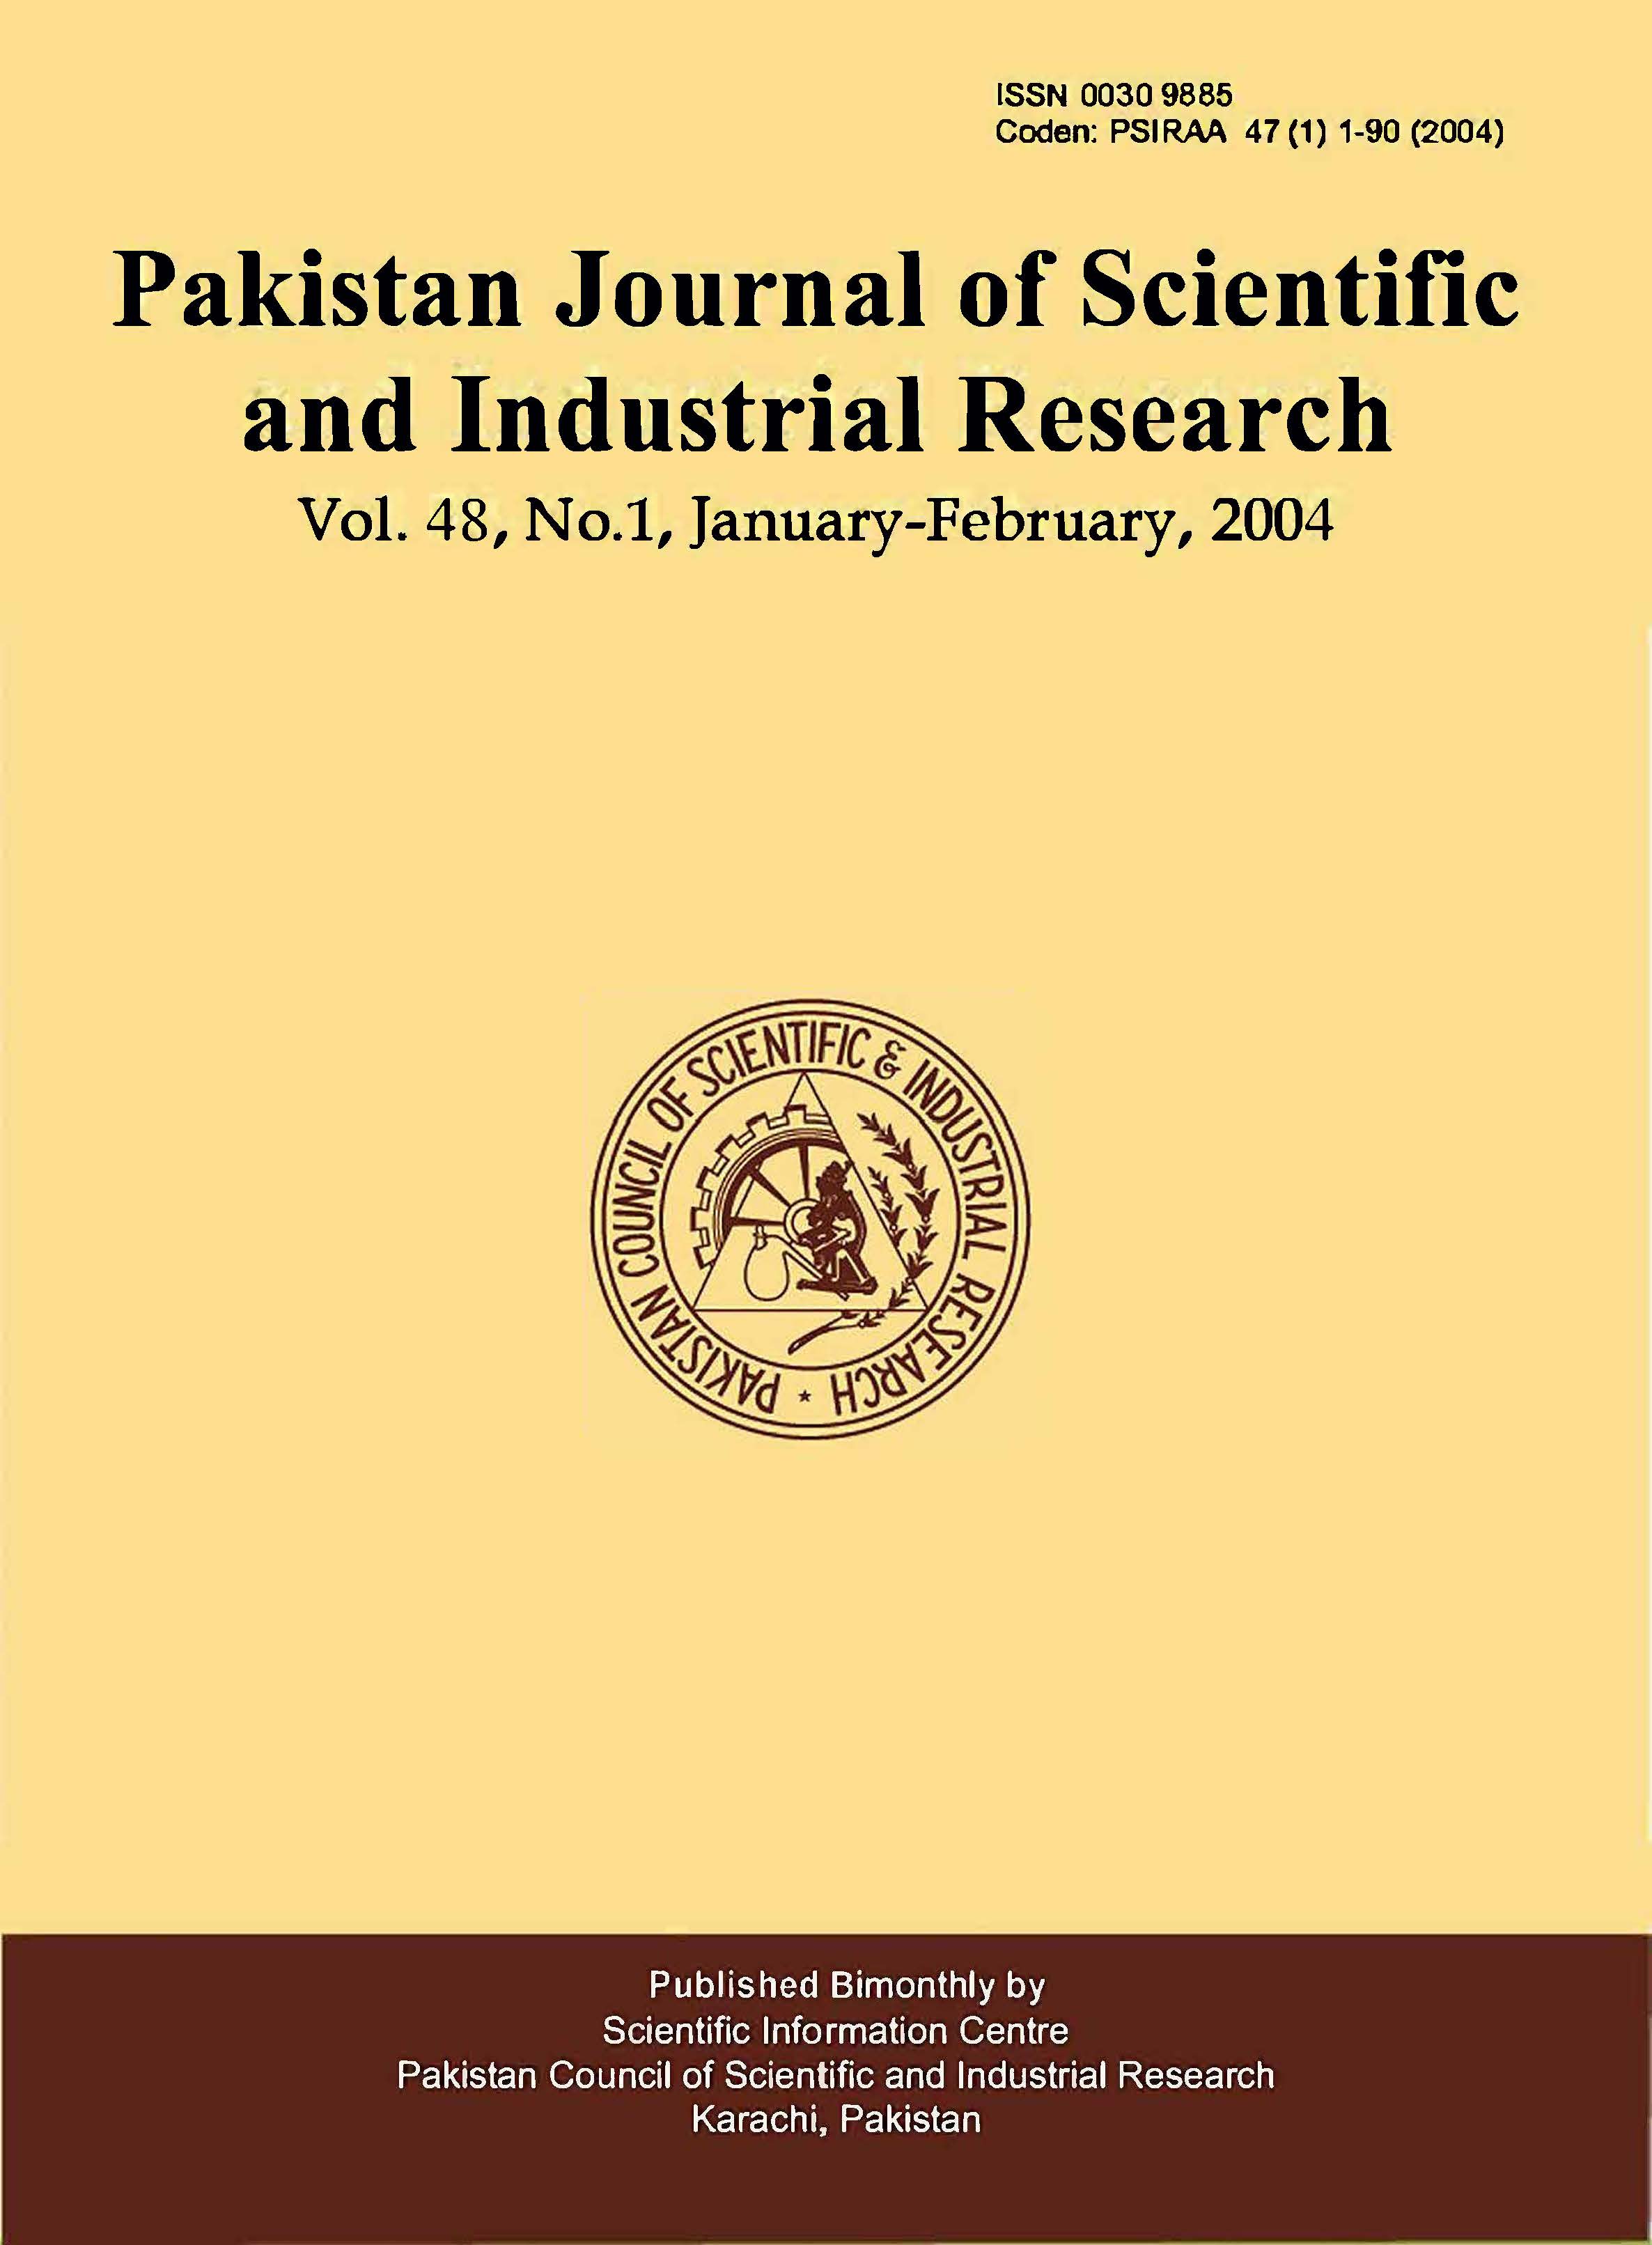 					View Vol. 47 No. 1 (2004): Pakistan Journal of Scientific and Industrial Research
				